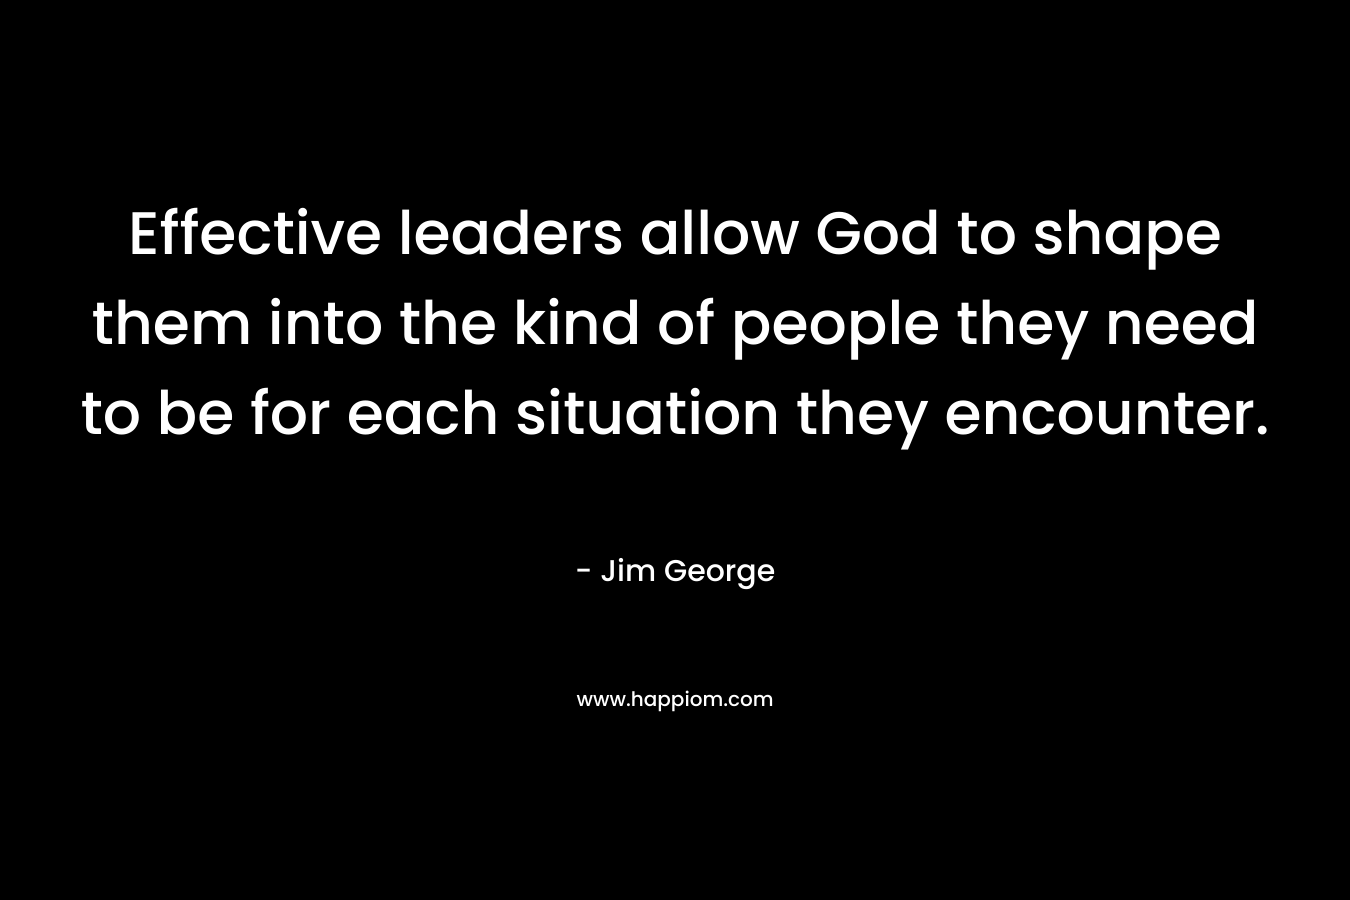 Effective leaders allow God to shape them into the kind of people they need to be for each situation they encounter.